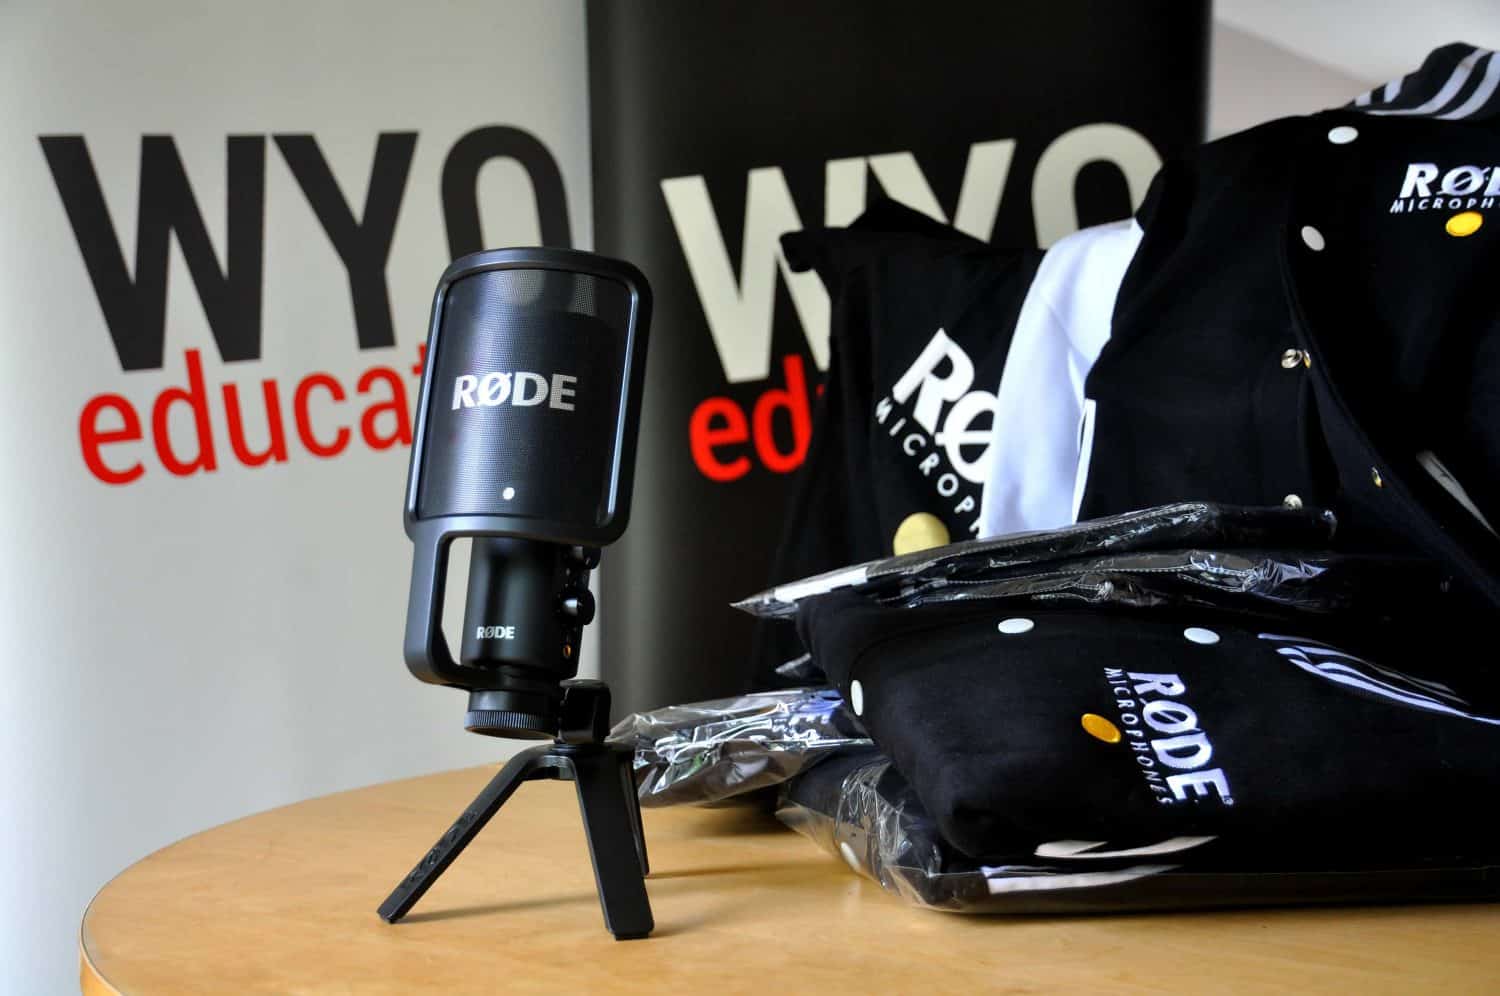 Røde Microphones support the World Youth Organization